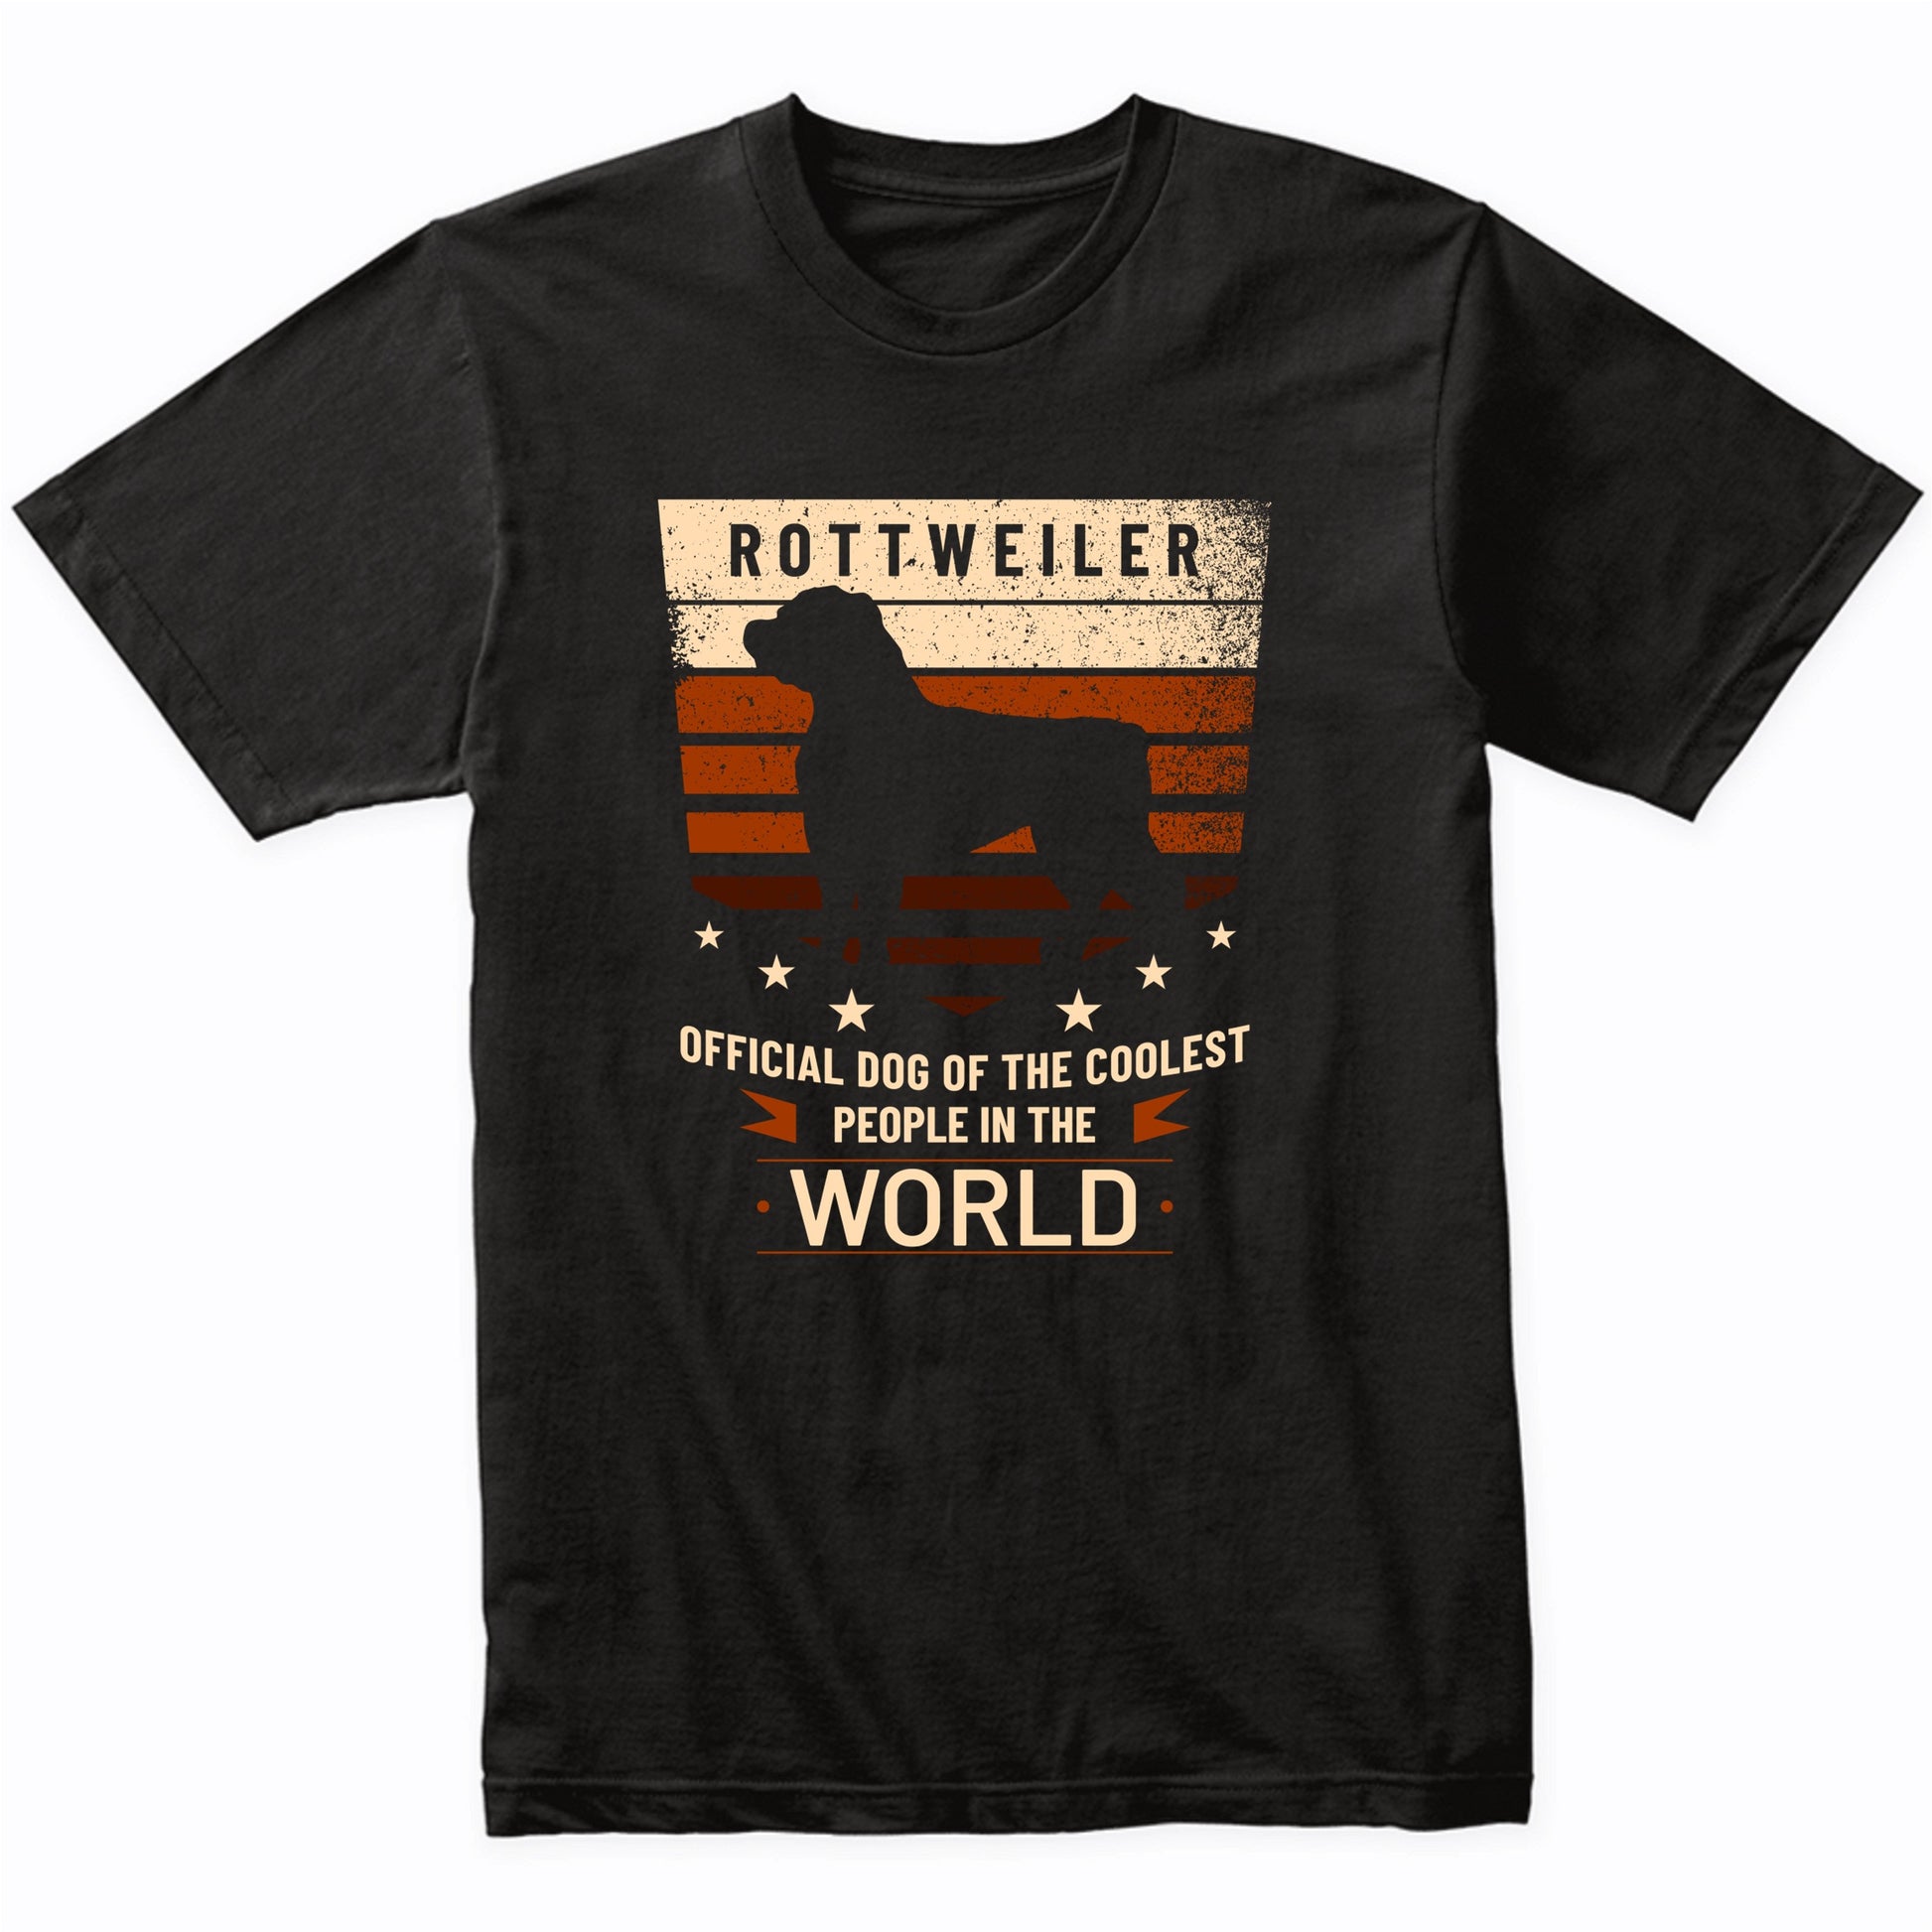 Rottweiler Official Dog Of The Coolest People In The World T-Shirt